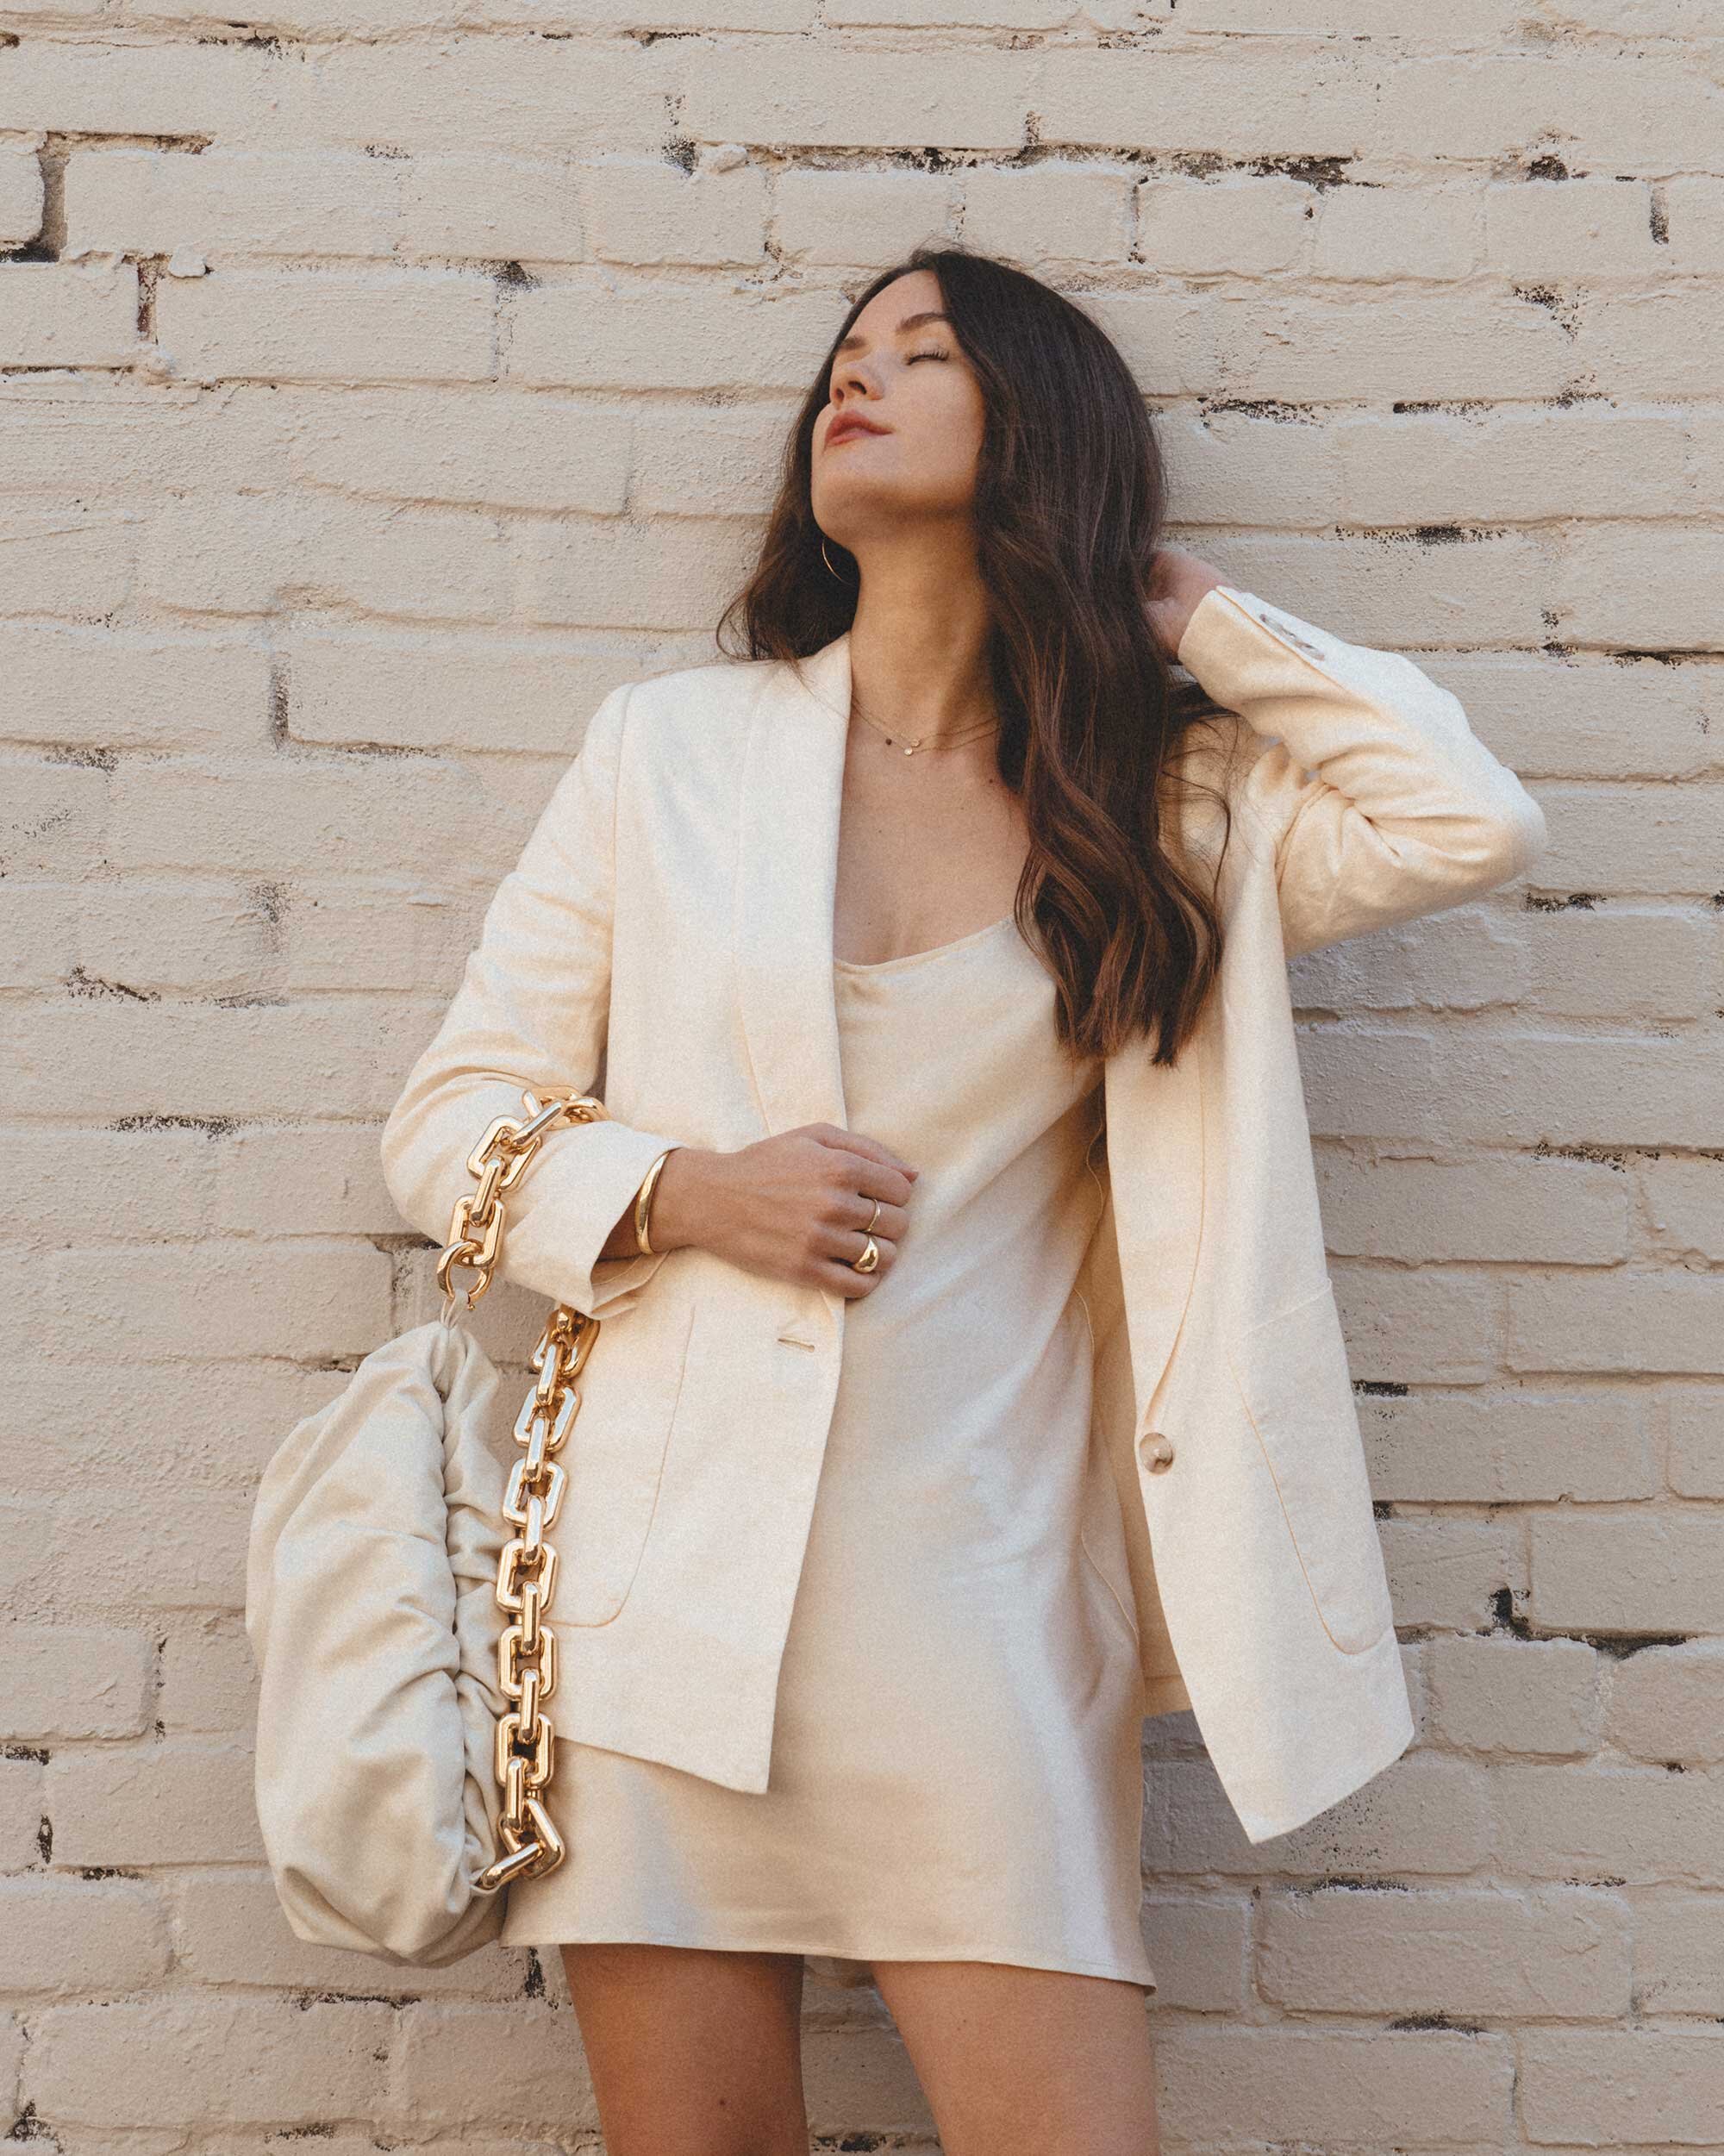 Early Fall Outfit Idea sophisticated linen blazer with elegant clean lines. Sarah Butler of @sarahchristine wearing Joie Dru Ecru Linen Blazer with beige satin mini slip dress and Bottega Veneta The Chain pouch shoulder bag -5.jpg